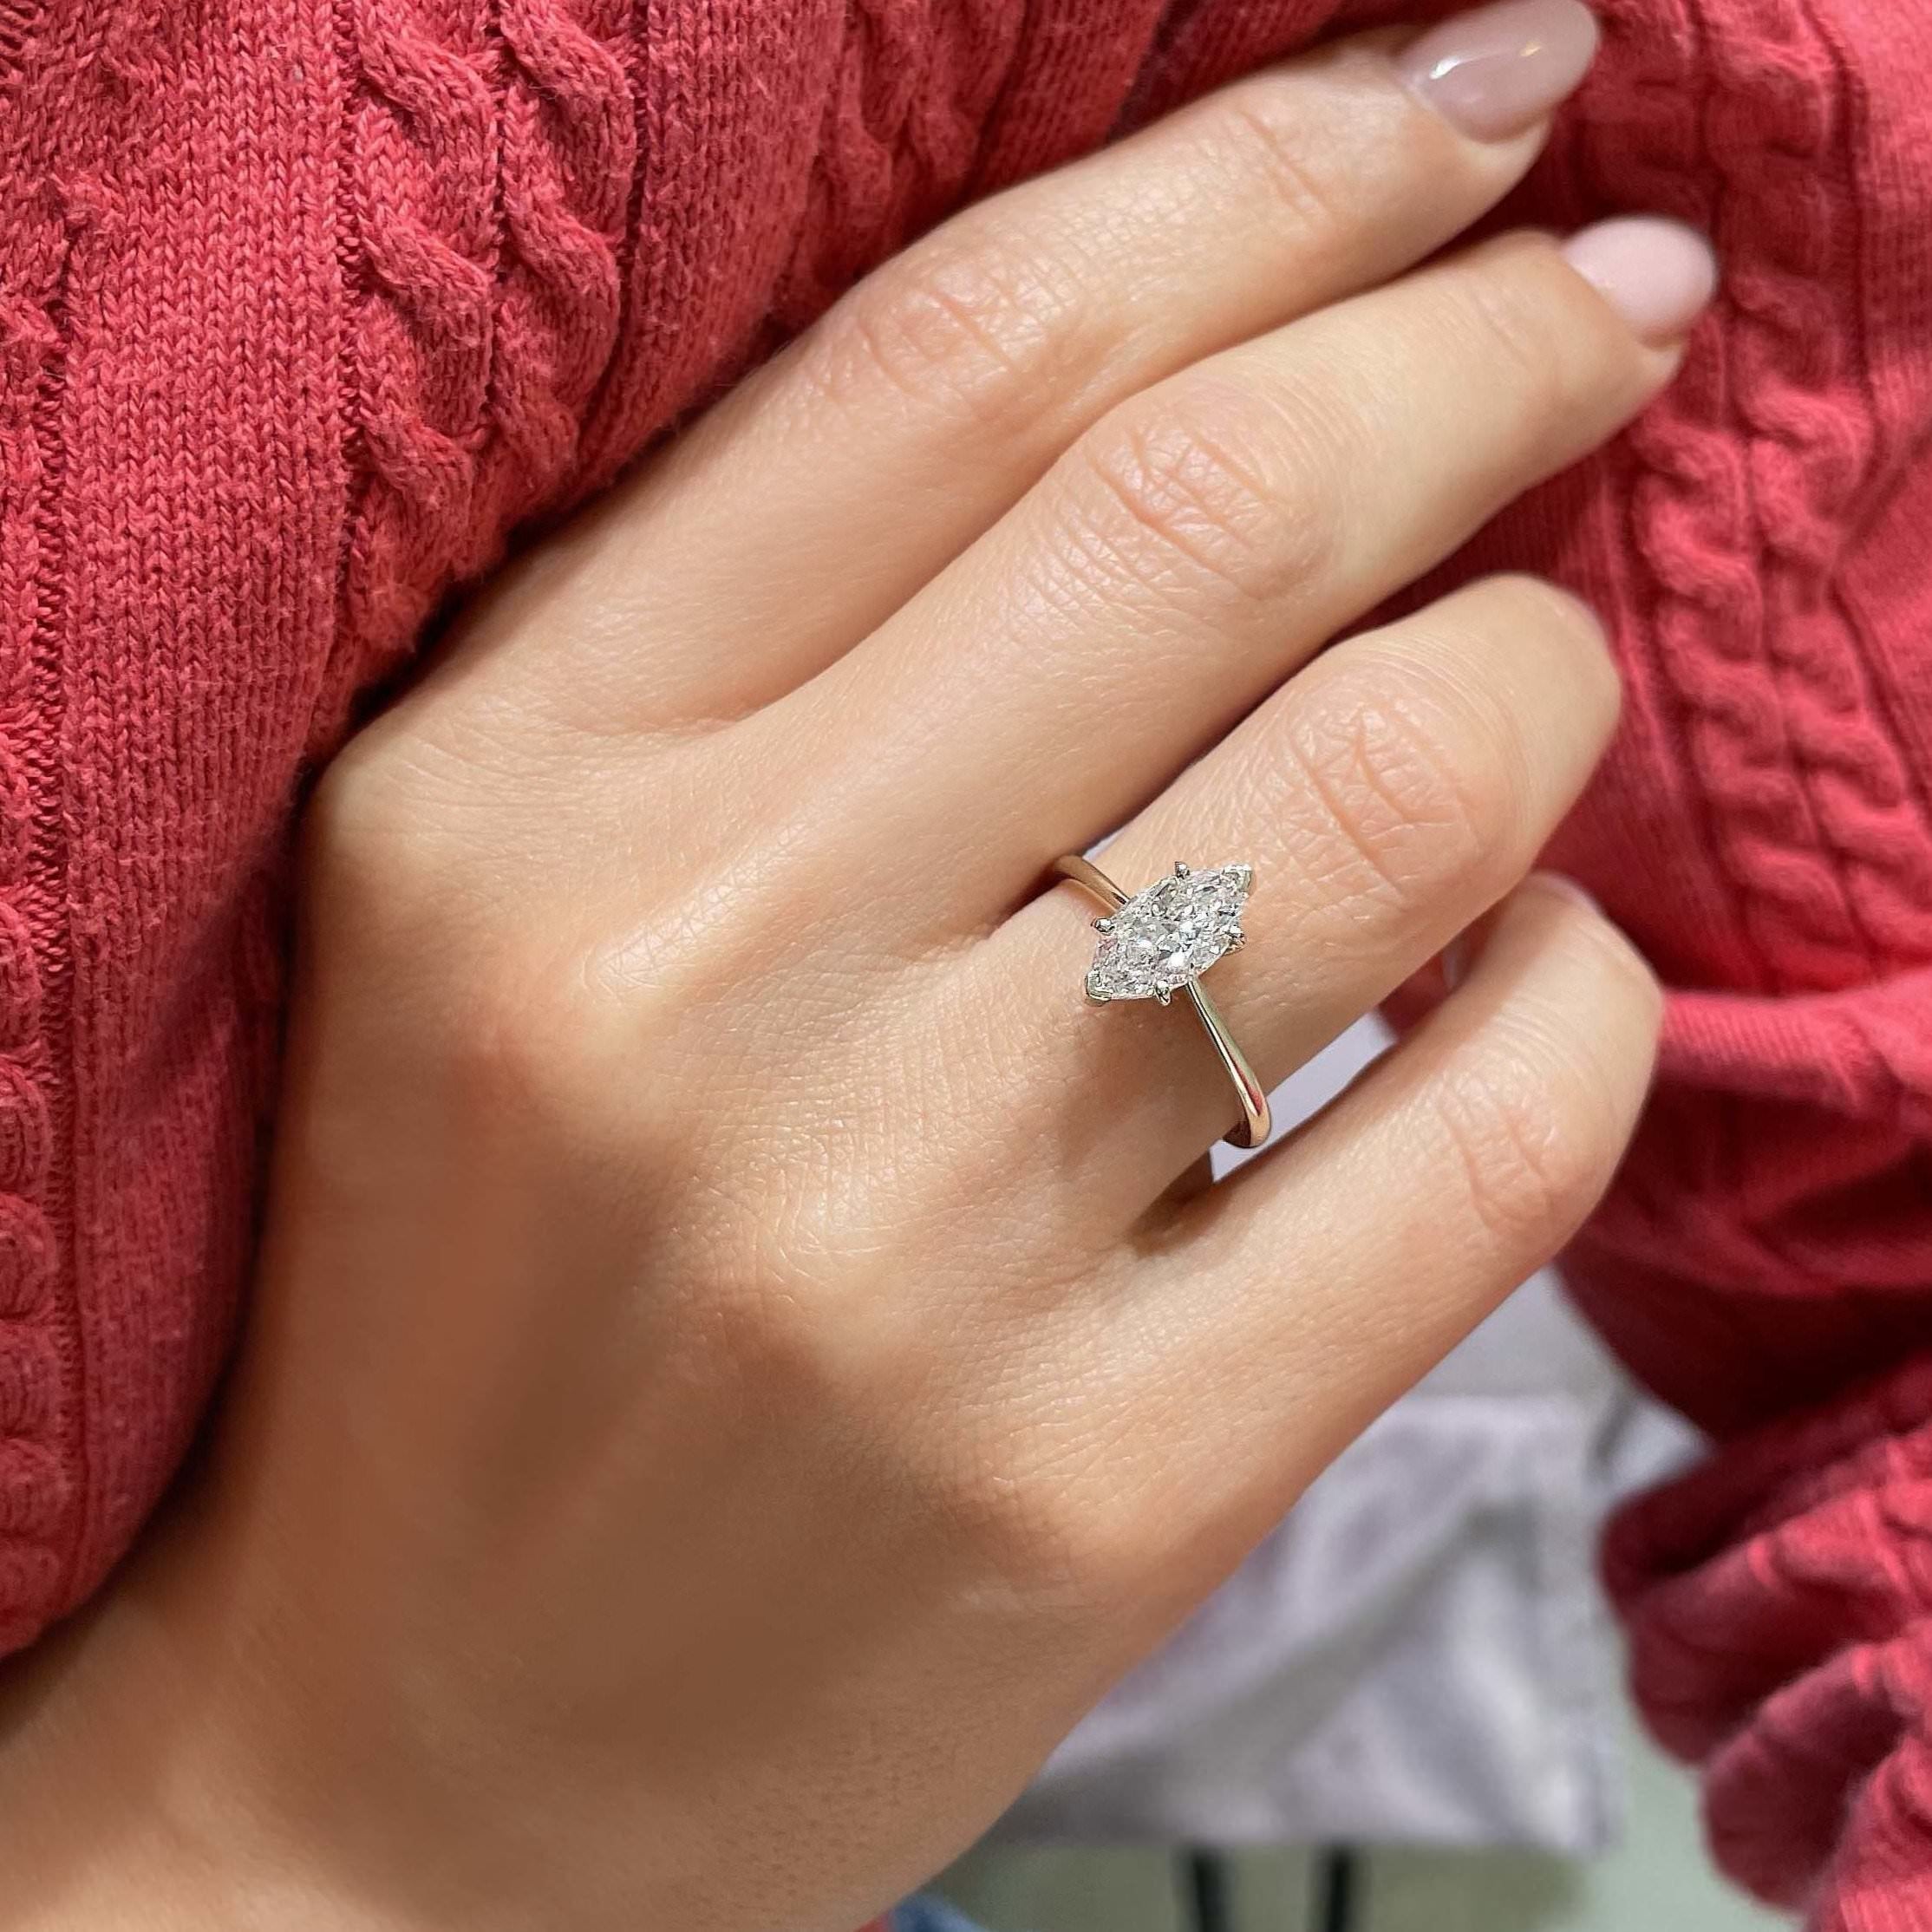 Which wedding band is your favorite with this Samantha Pear? 💍✨  #samantharing 1) Tori Ring 2) 2.6mm Floating Diamond Ring 3) Peti... |  Instagram